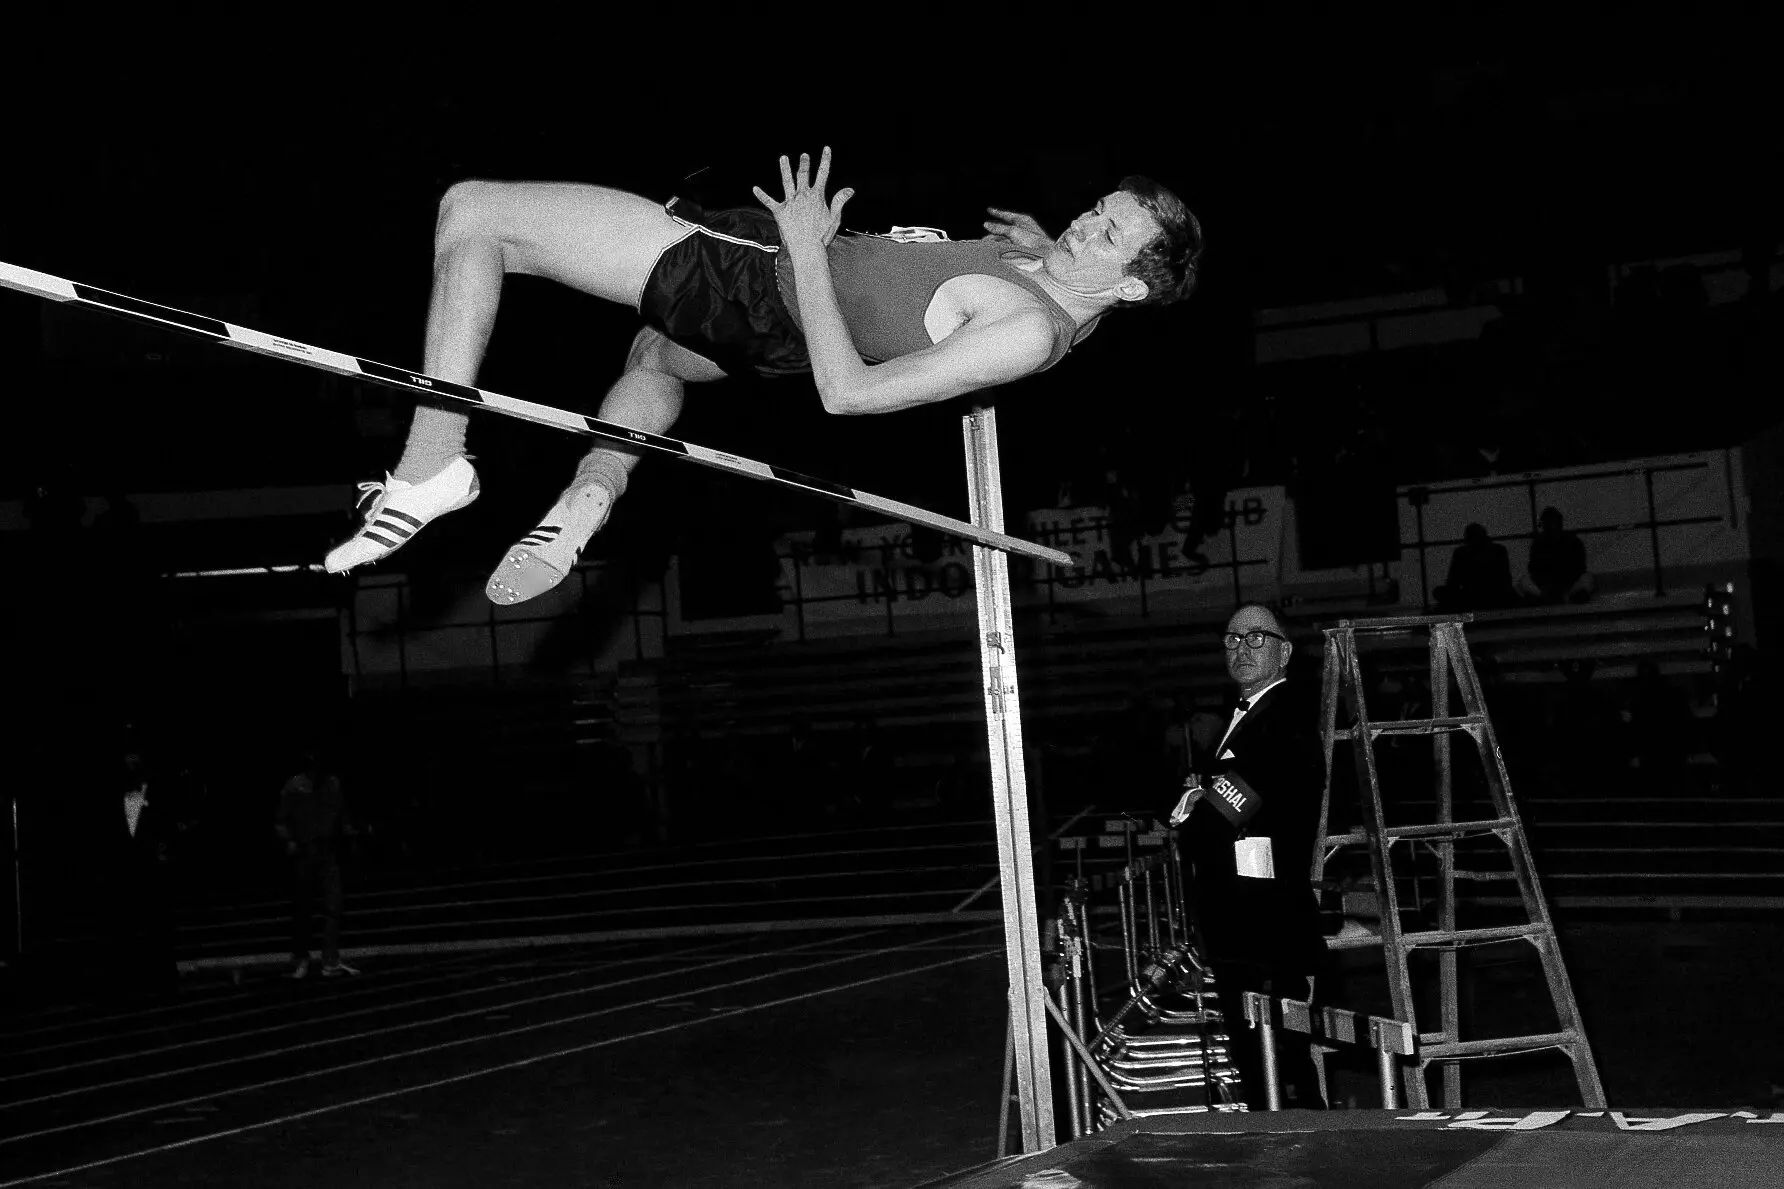 An image of a White man with short hair jumping over a bar backwards, with another man in glasses standing behind watching.